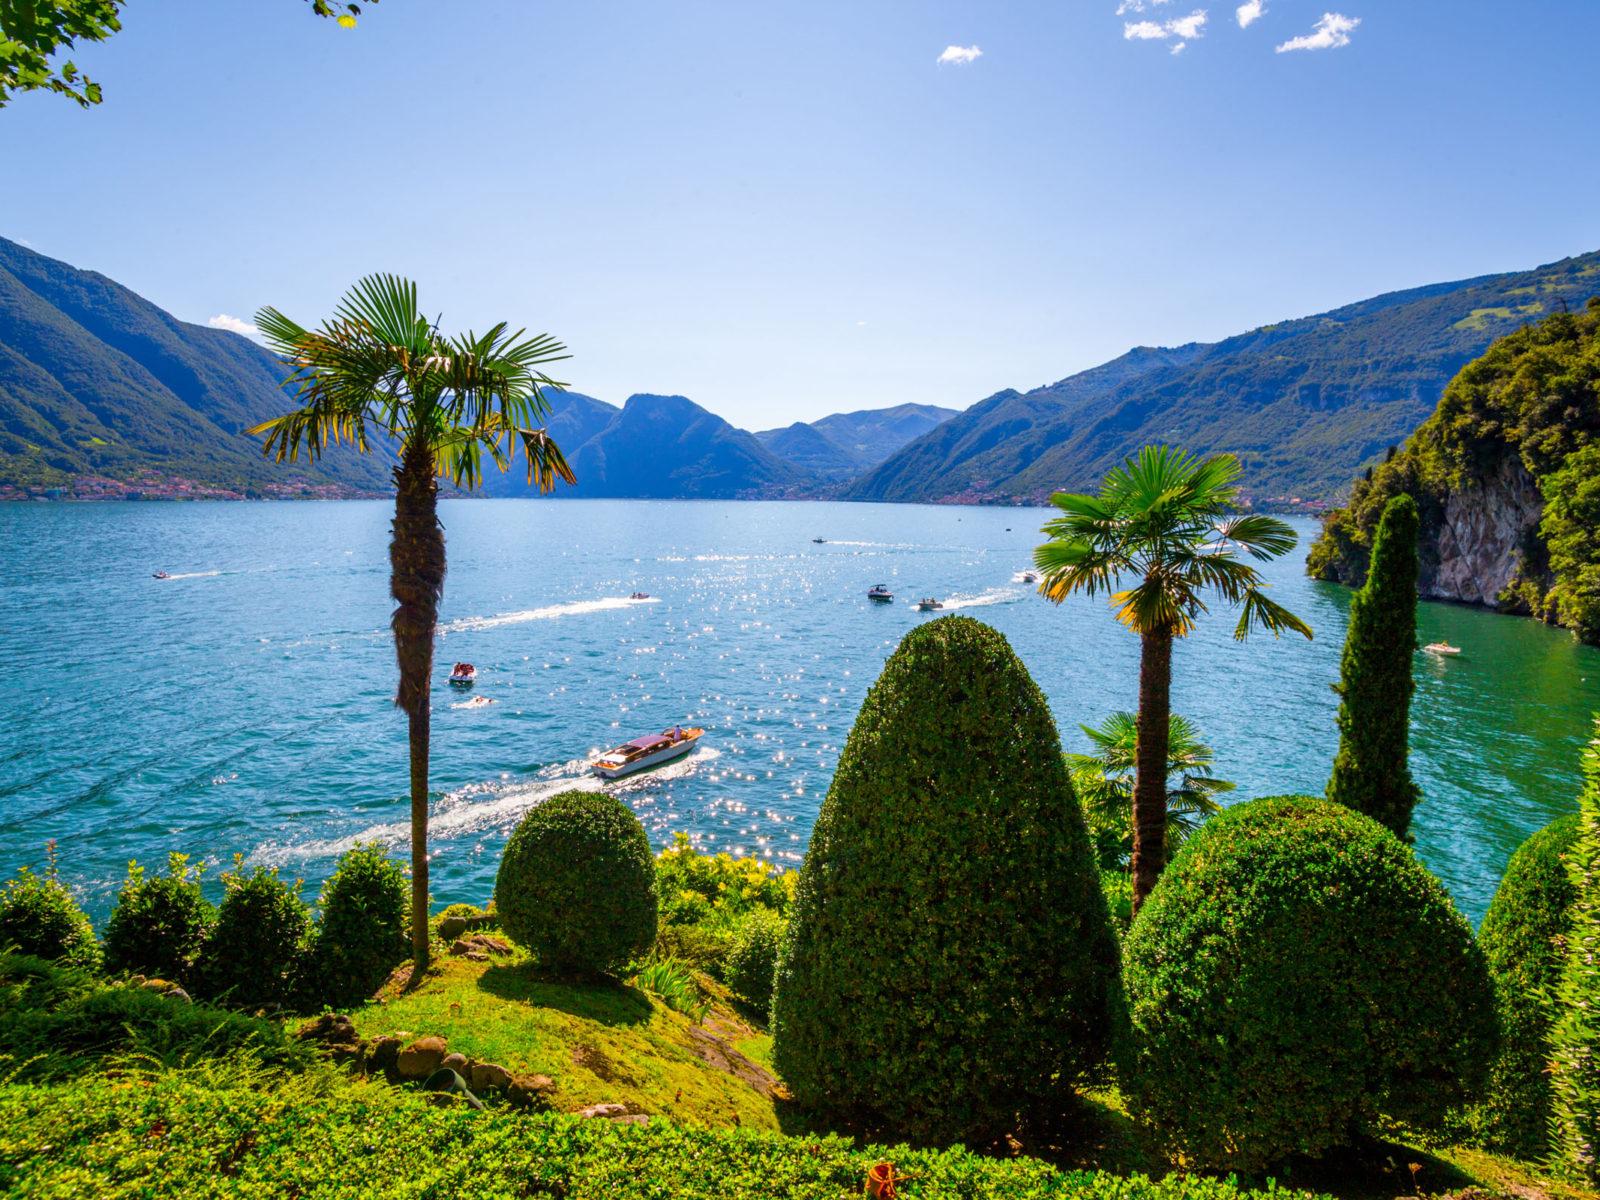 Lake In Italy Lake Como Resort In The Lombardy Region Of Northern